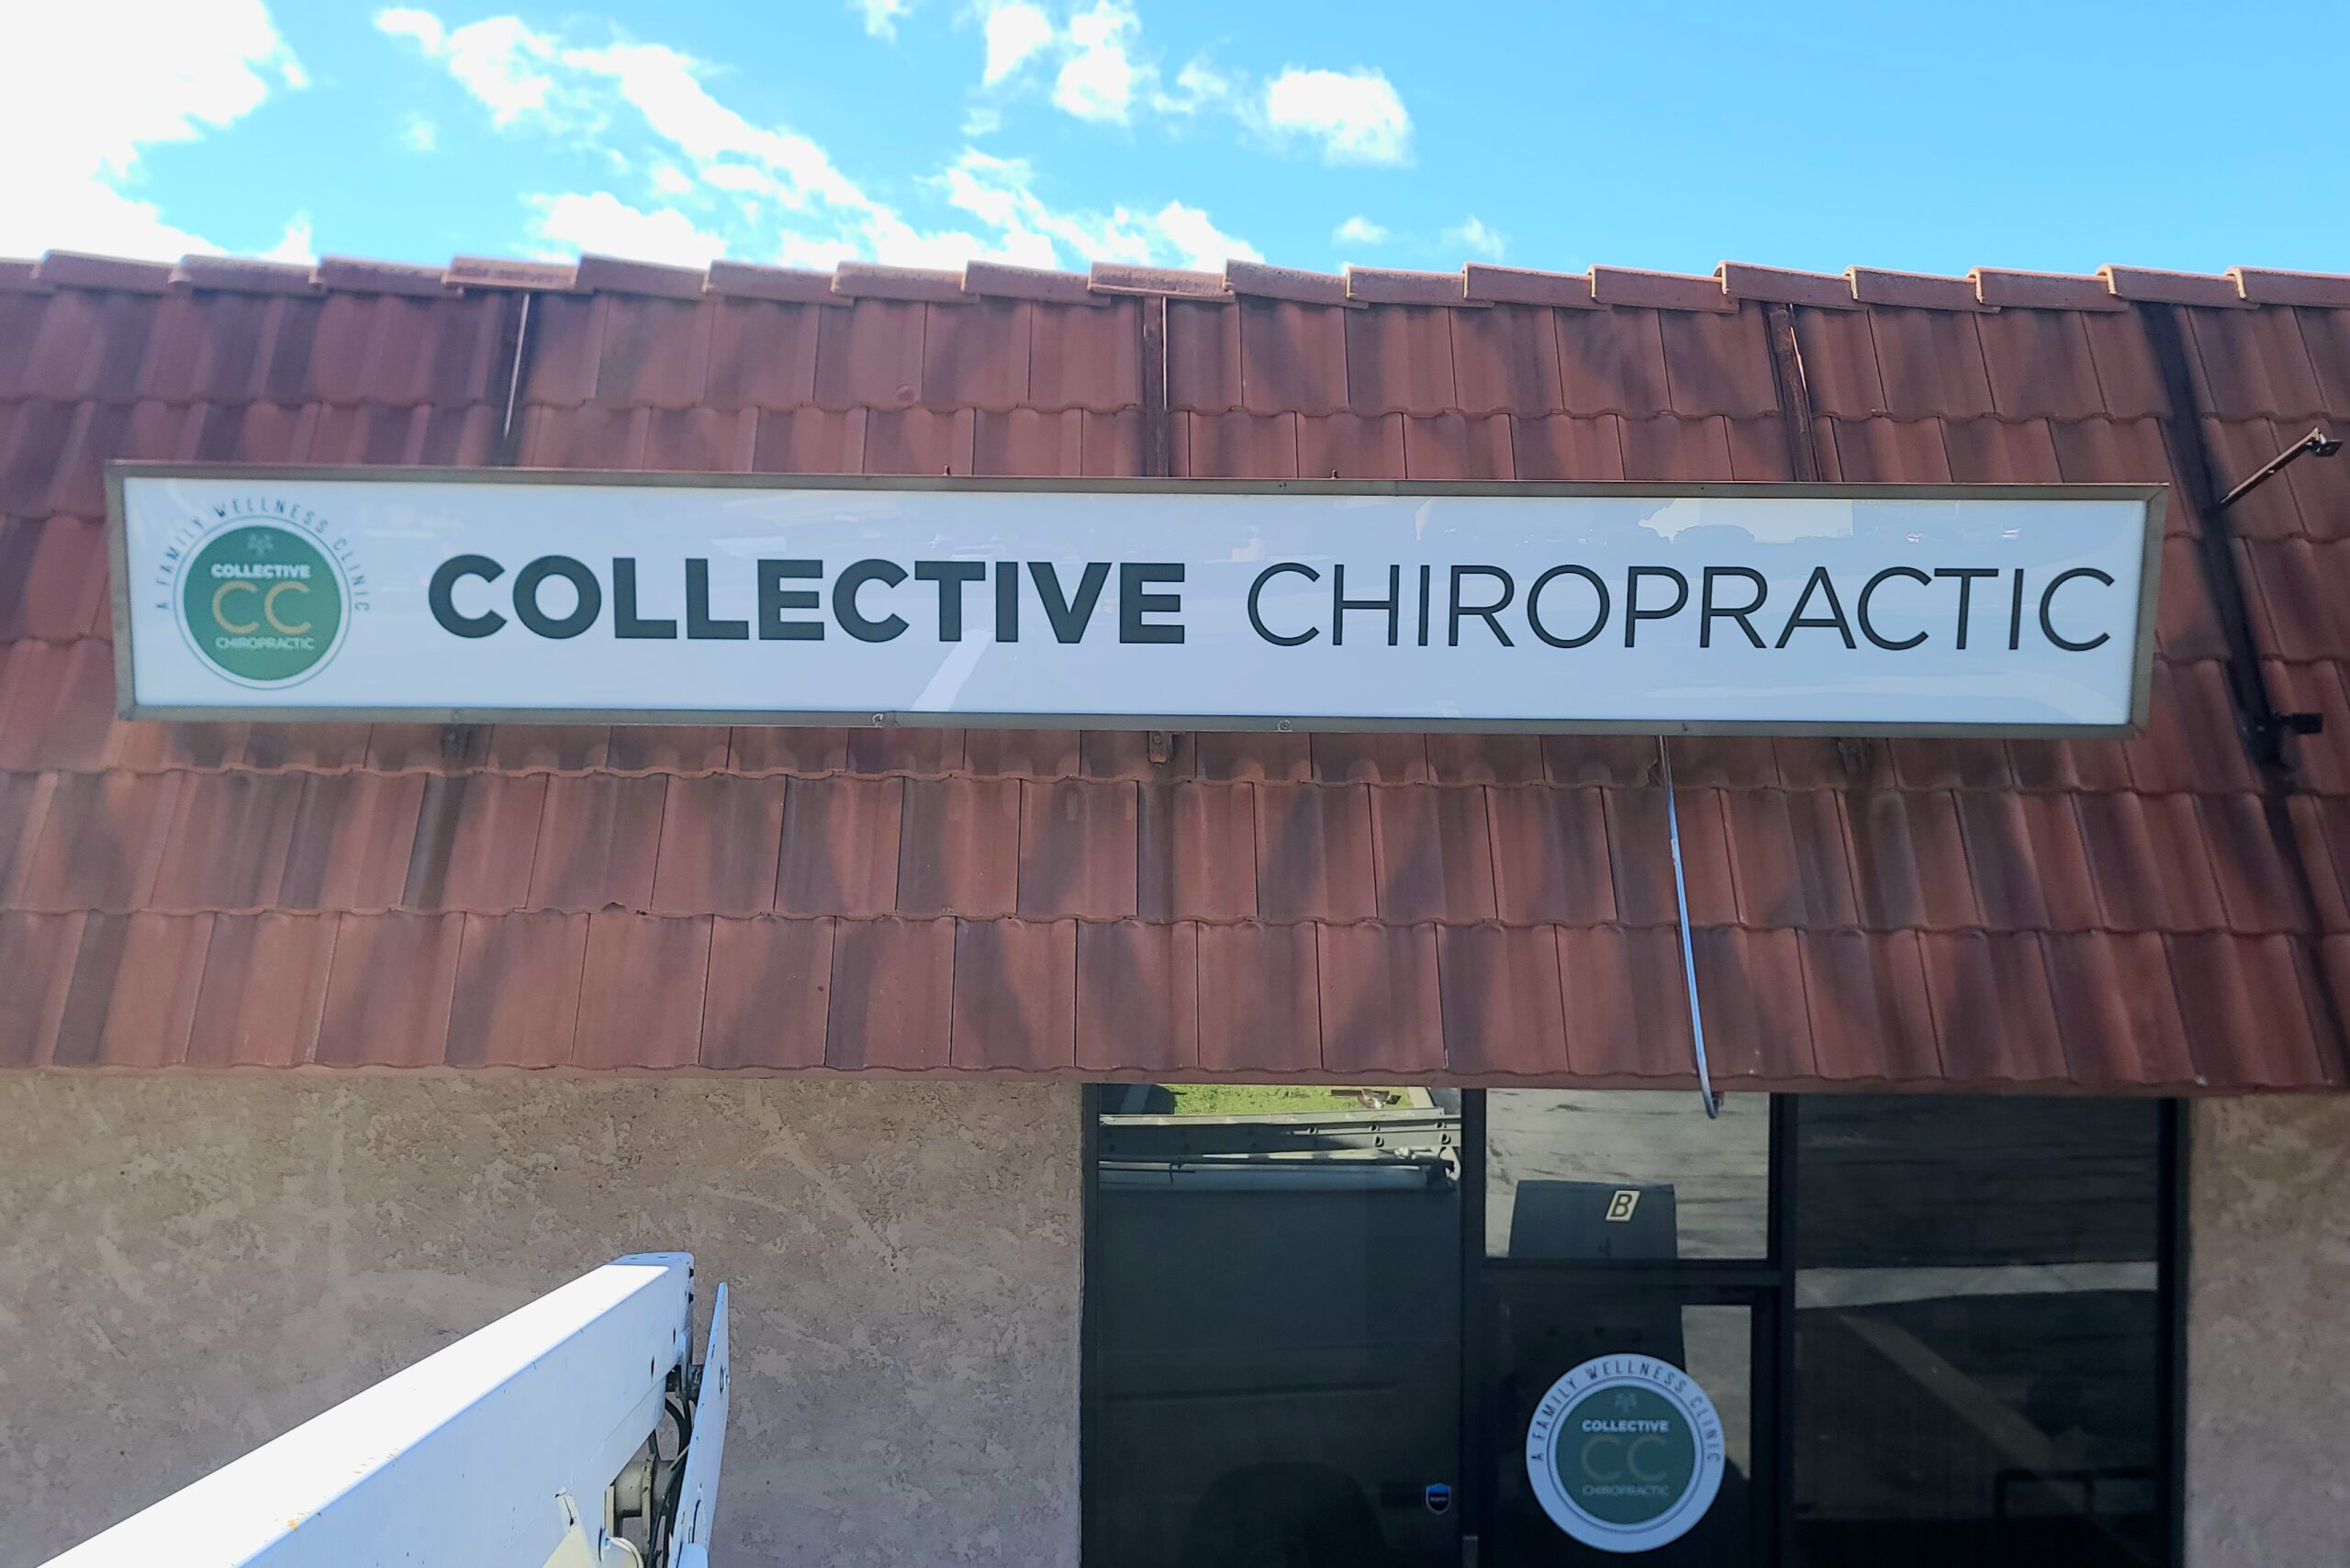 You are currently viewing Collective Chiropractor Lightbox & Window Decal Simi Valley